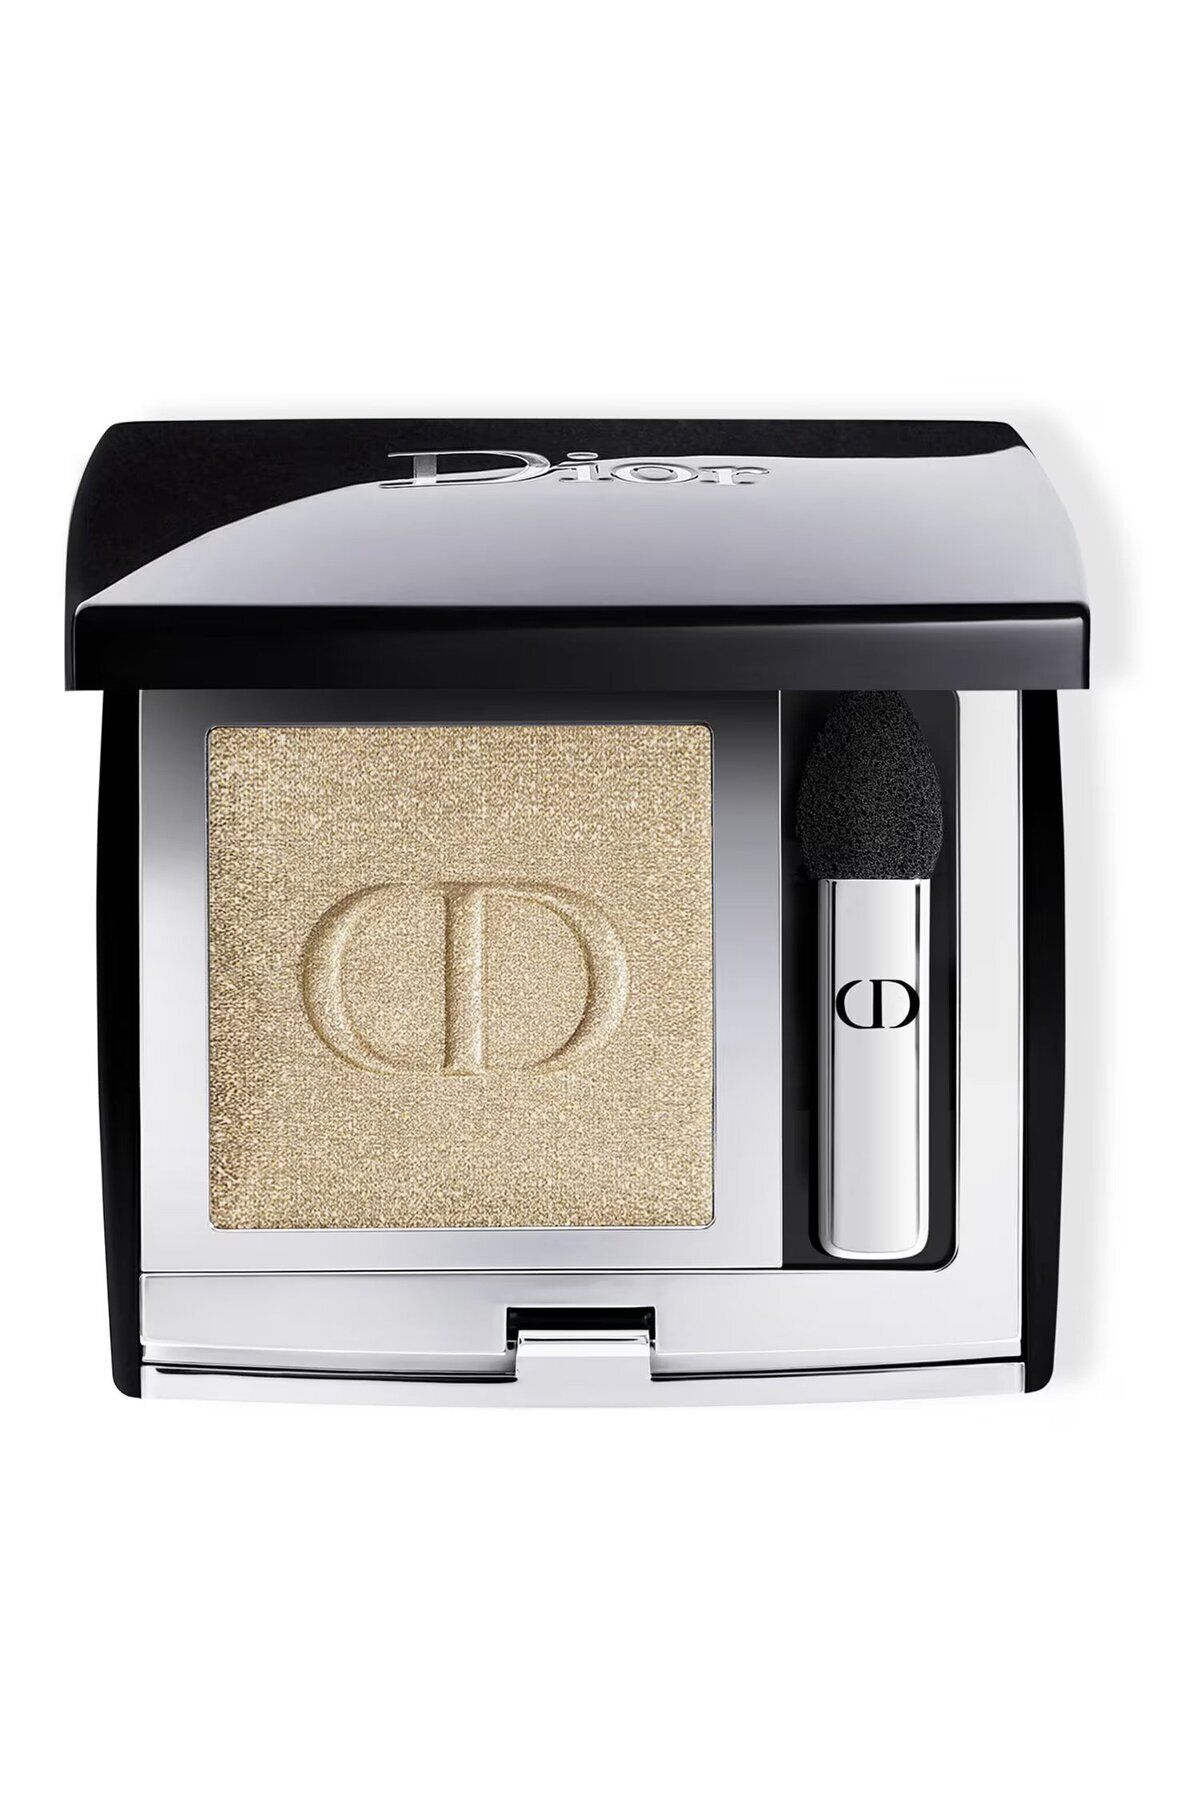 Dior MONO COULEUR COUTURE - ALOE VERA AND PİNE OİL-EYESHADOW THAT PLUMPS THE EYEBROWS 2 GR PSSN2105